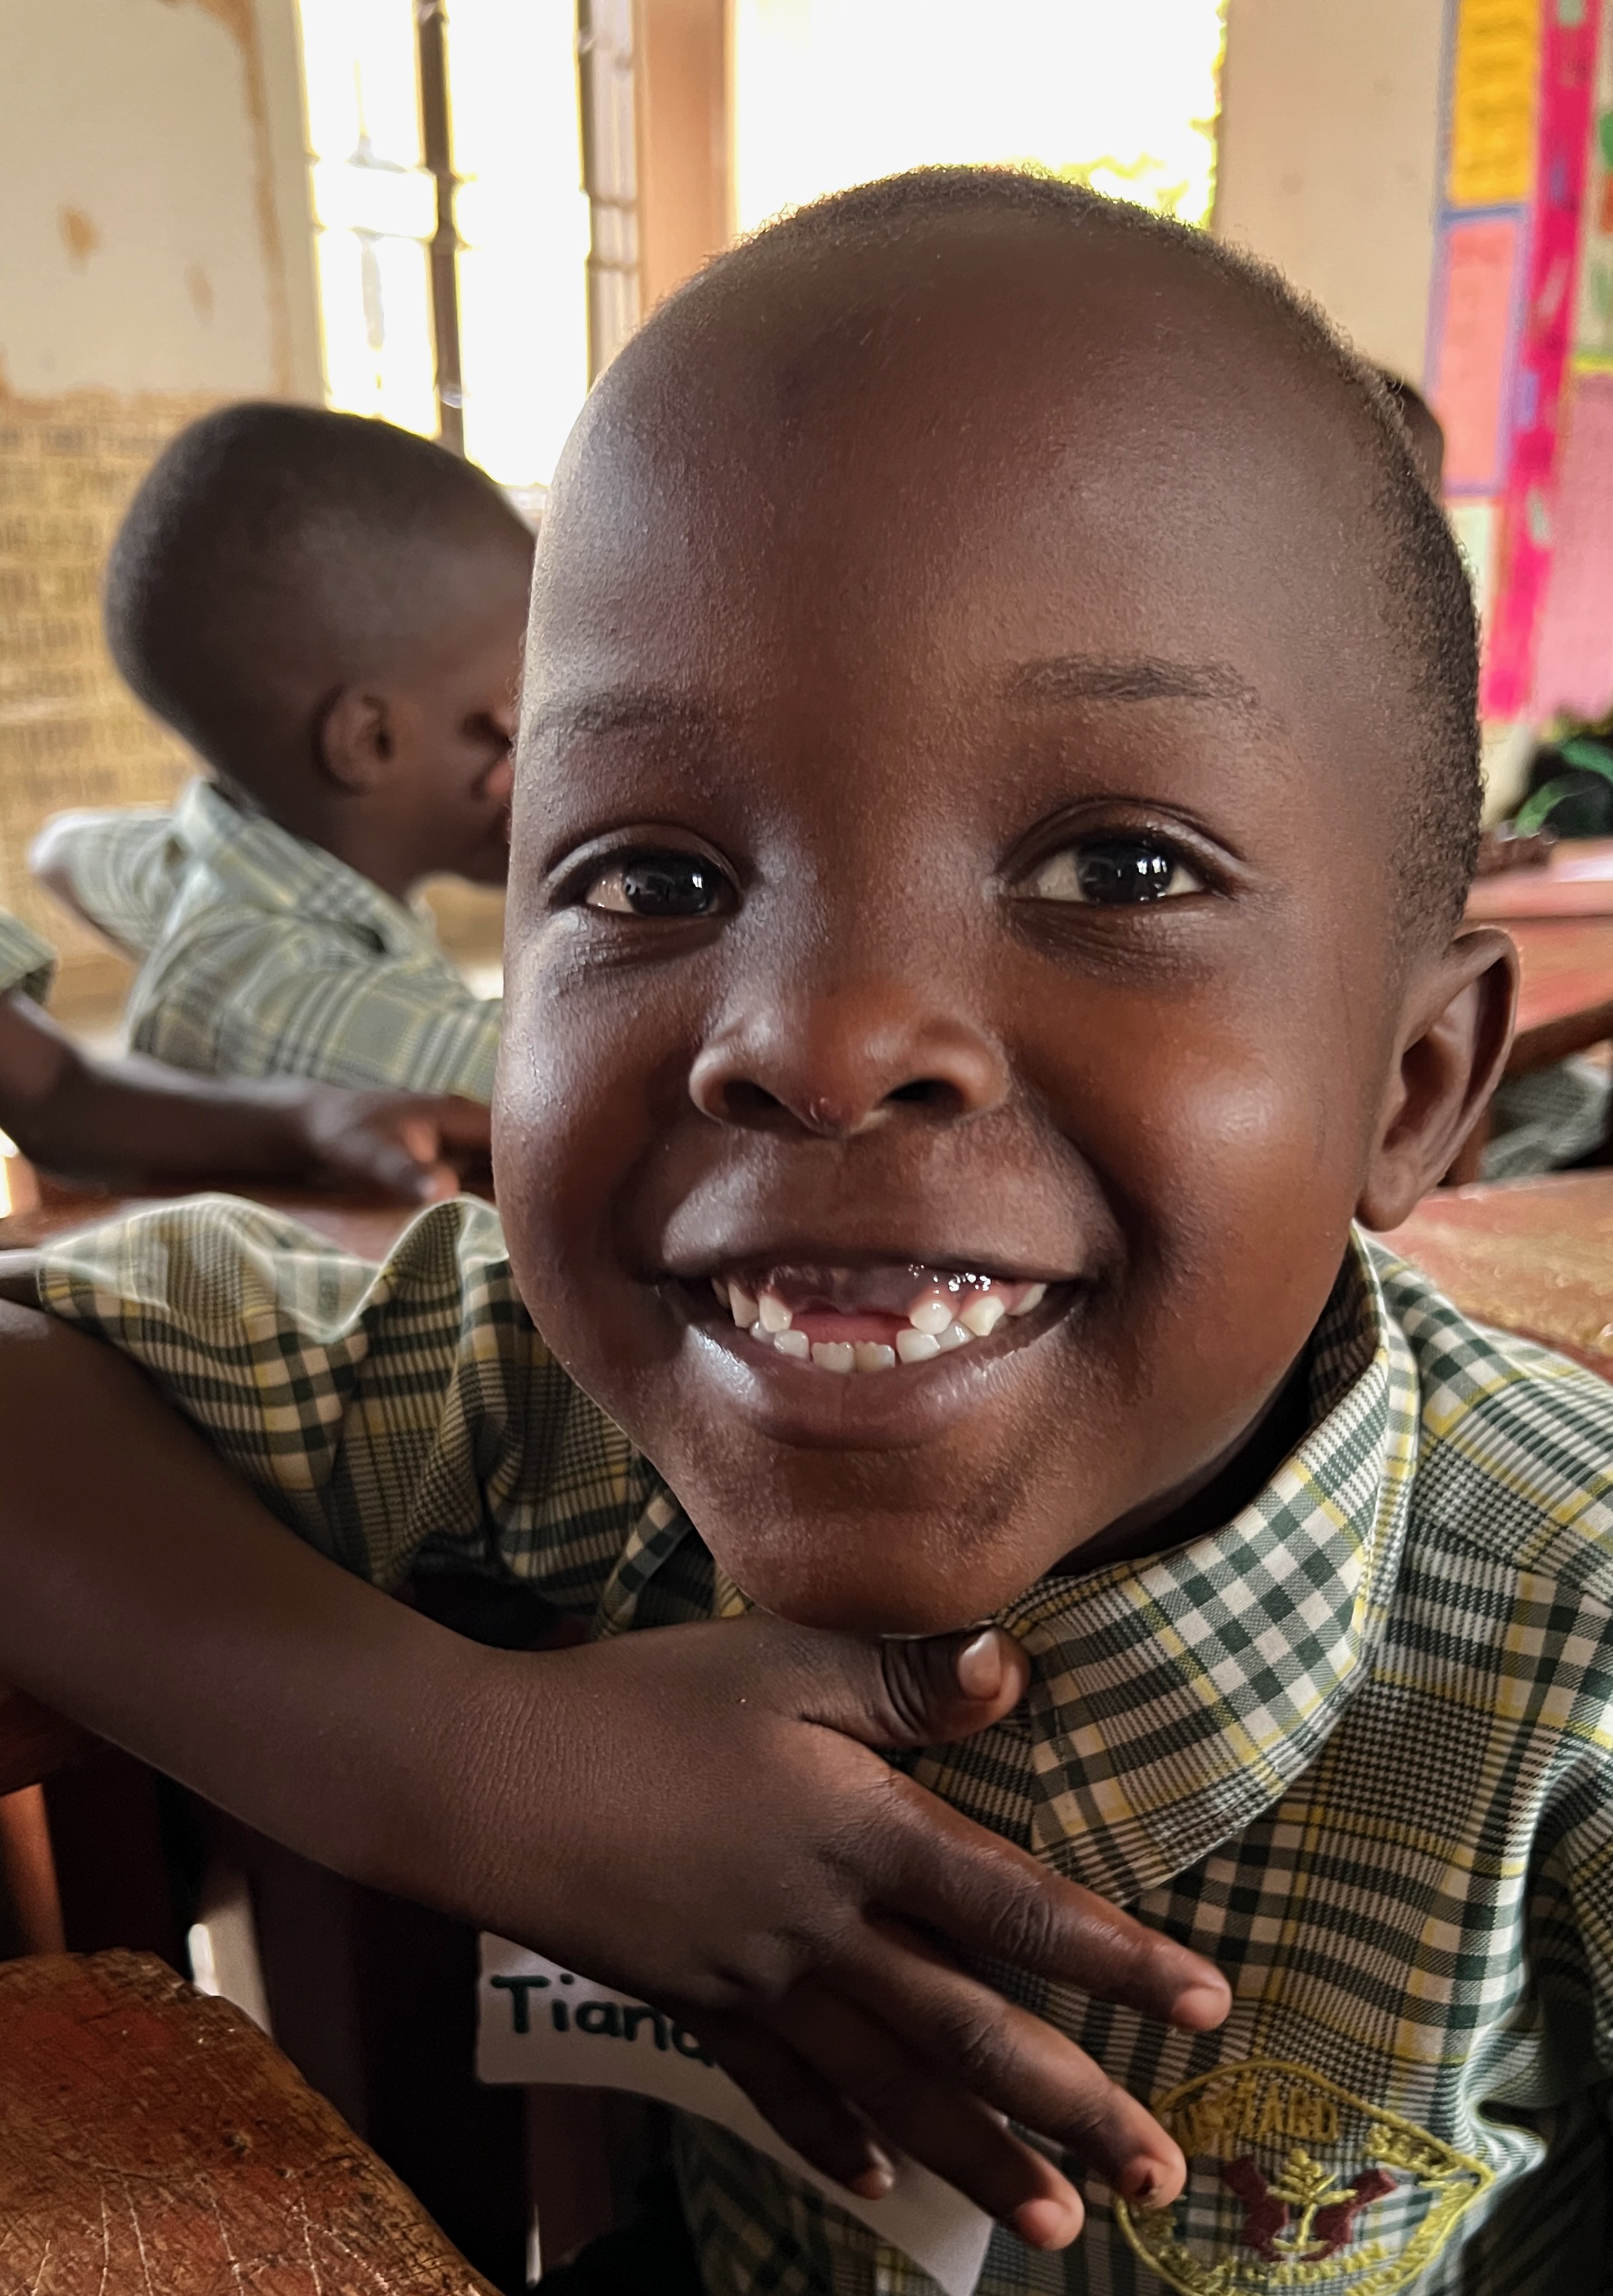 Ugandan nursery school child with a big smile and two teeth missing